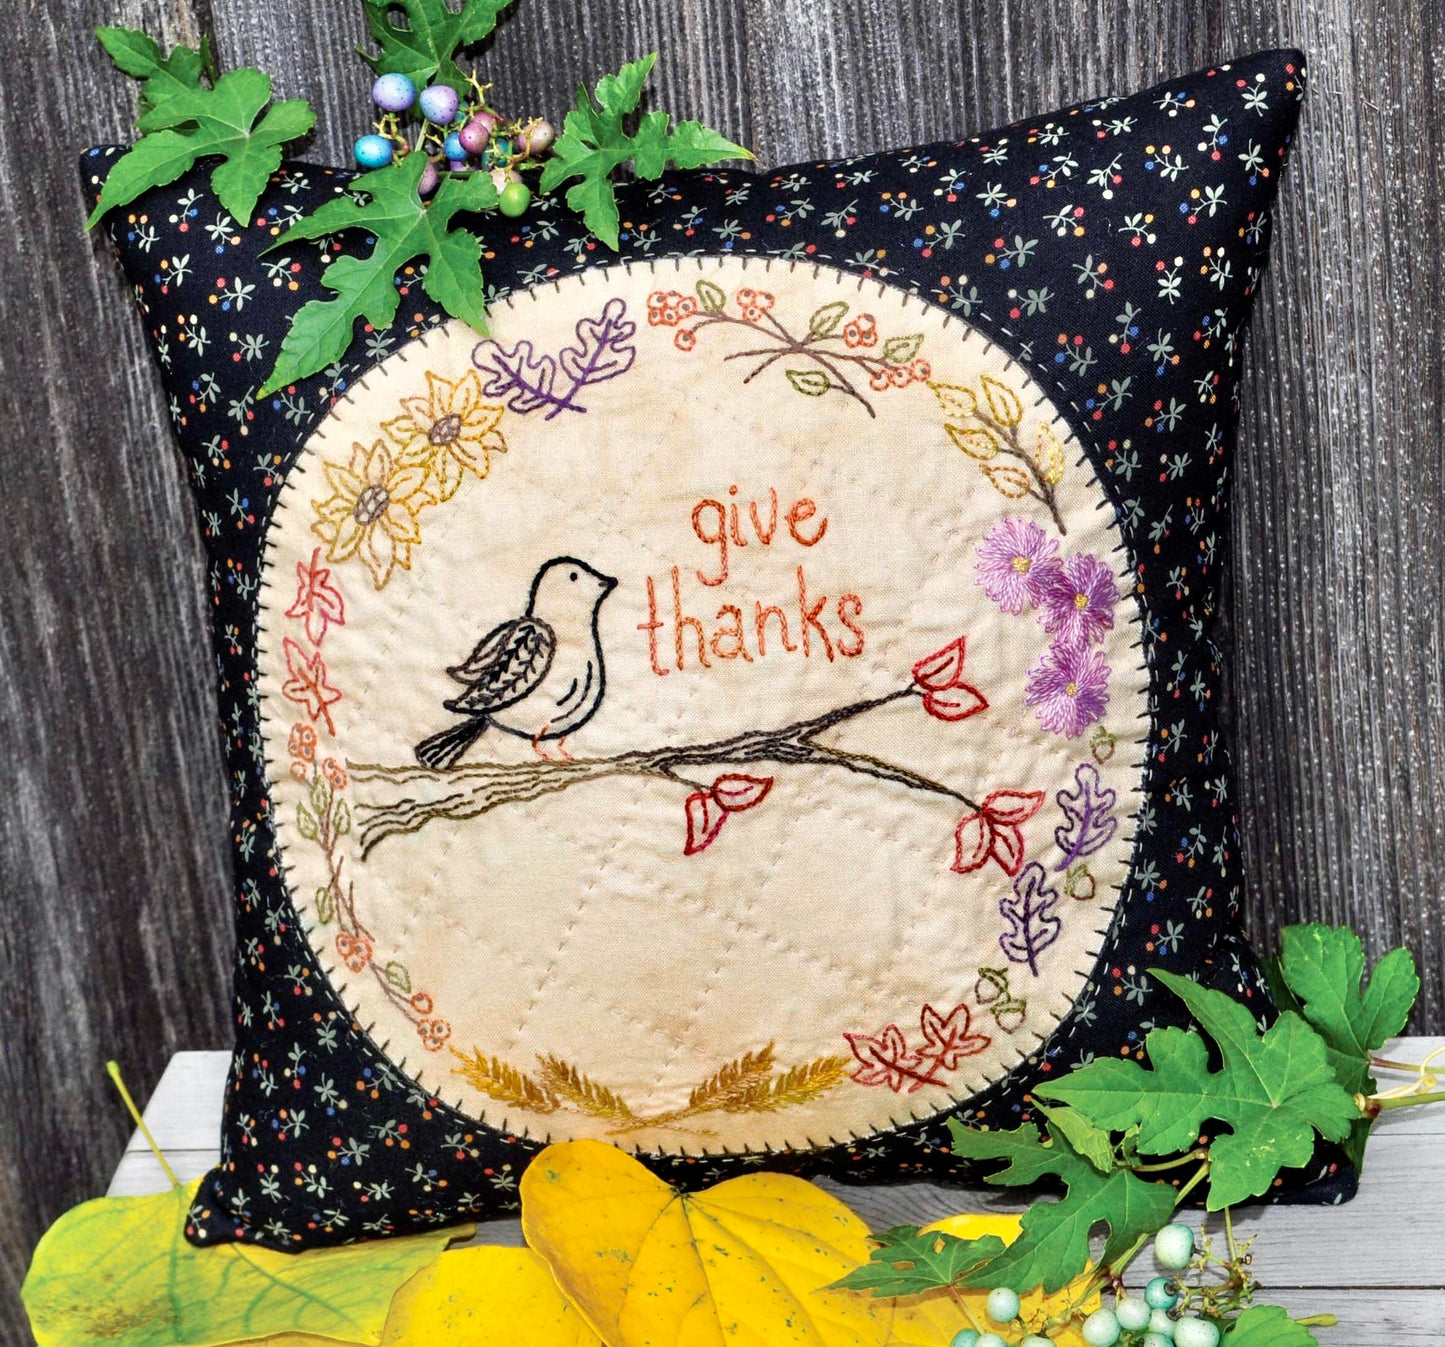 Pattern #116 - Give Thanks